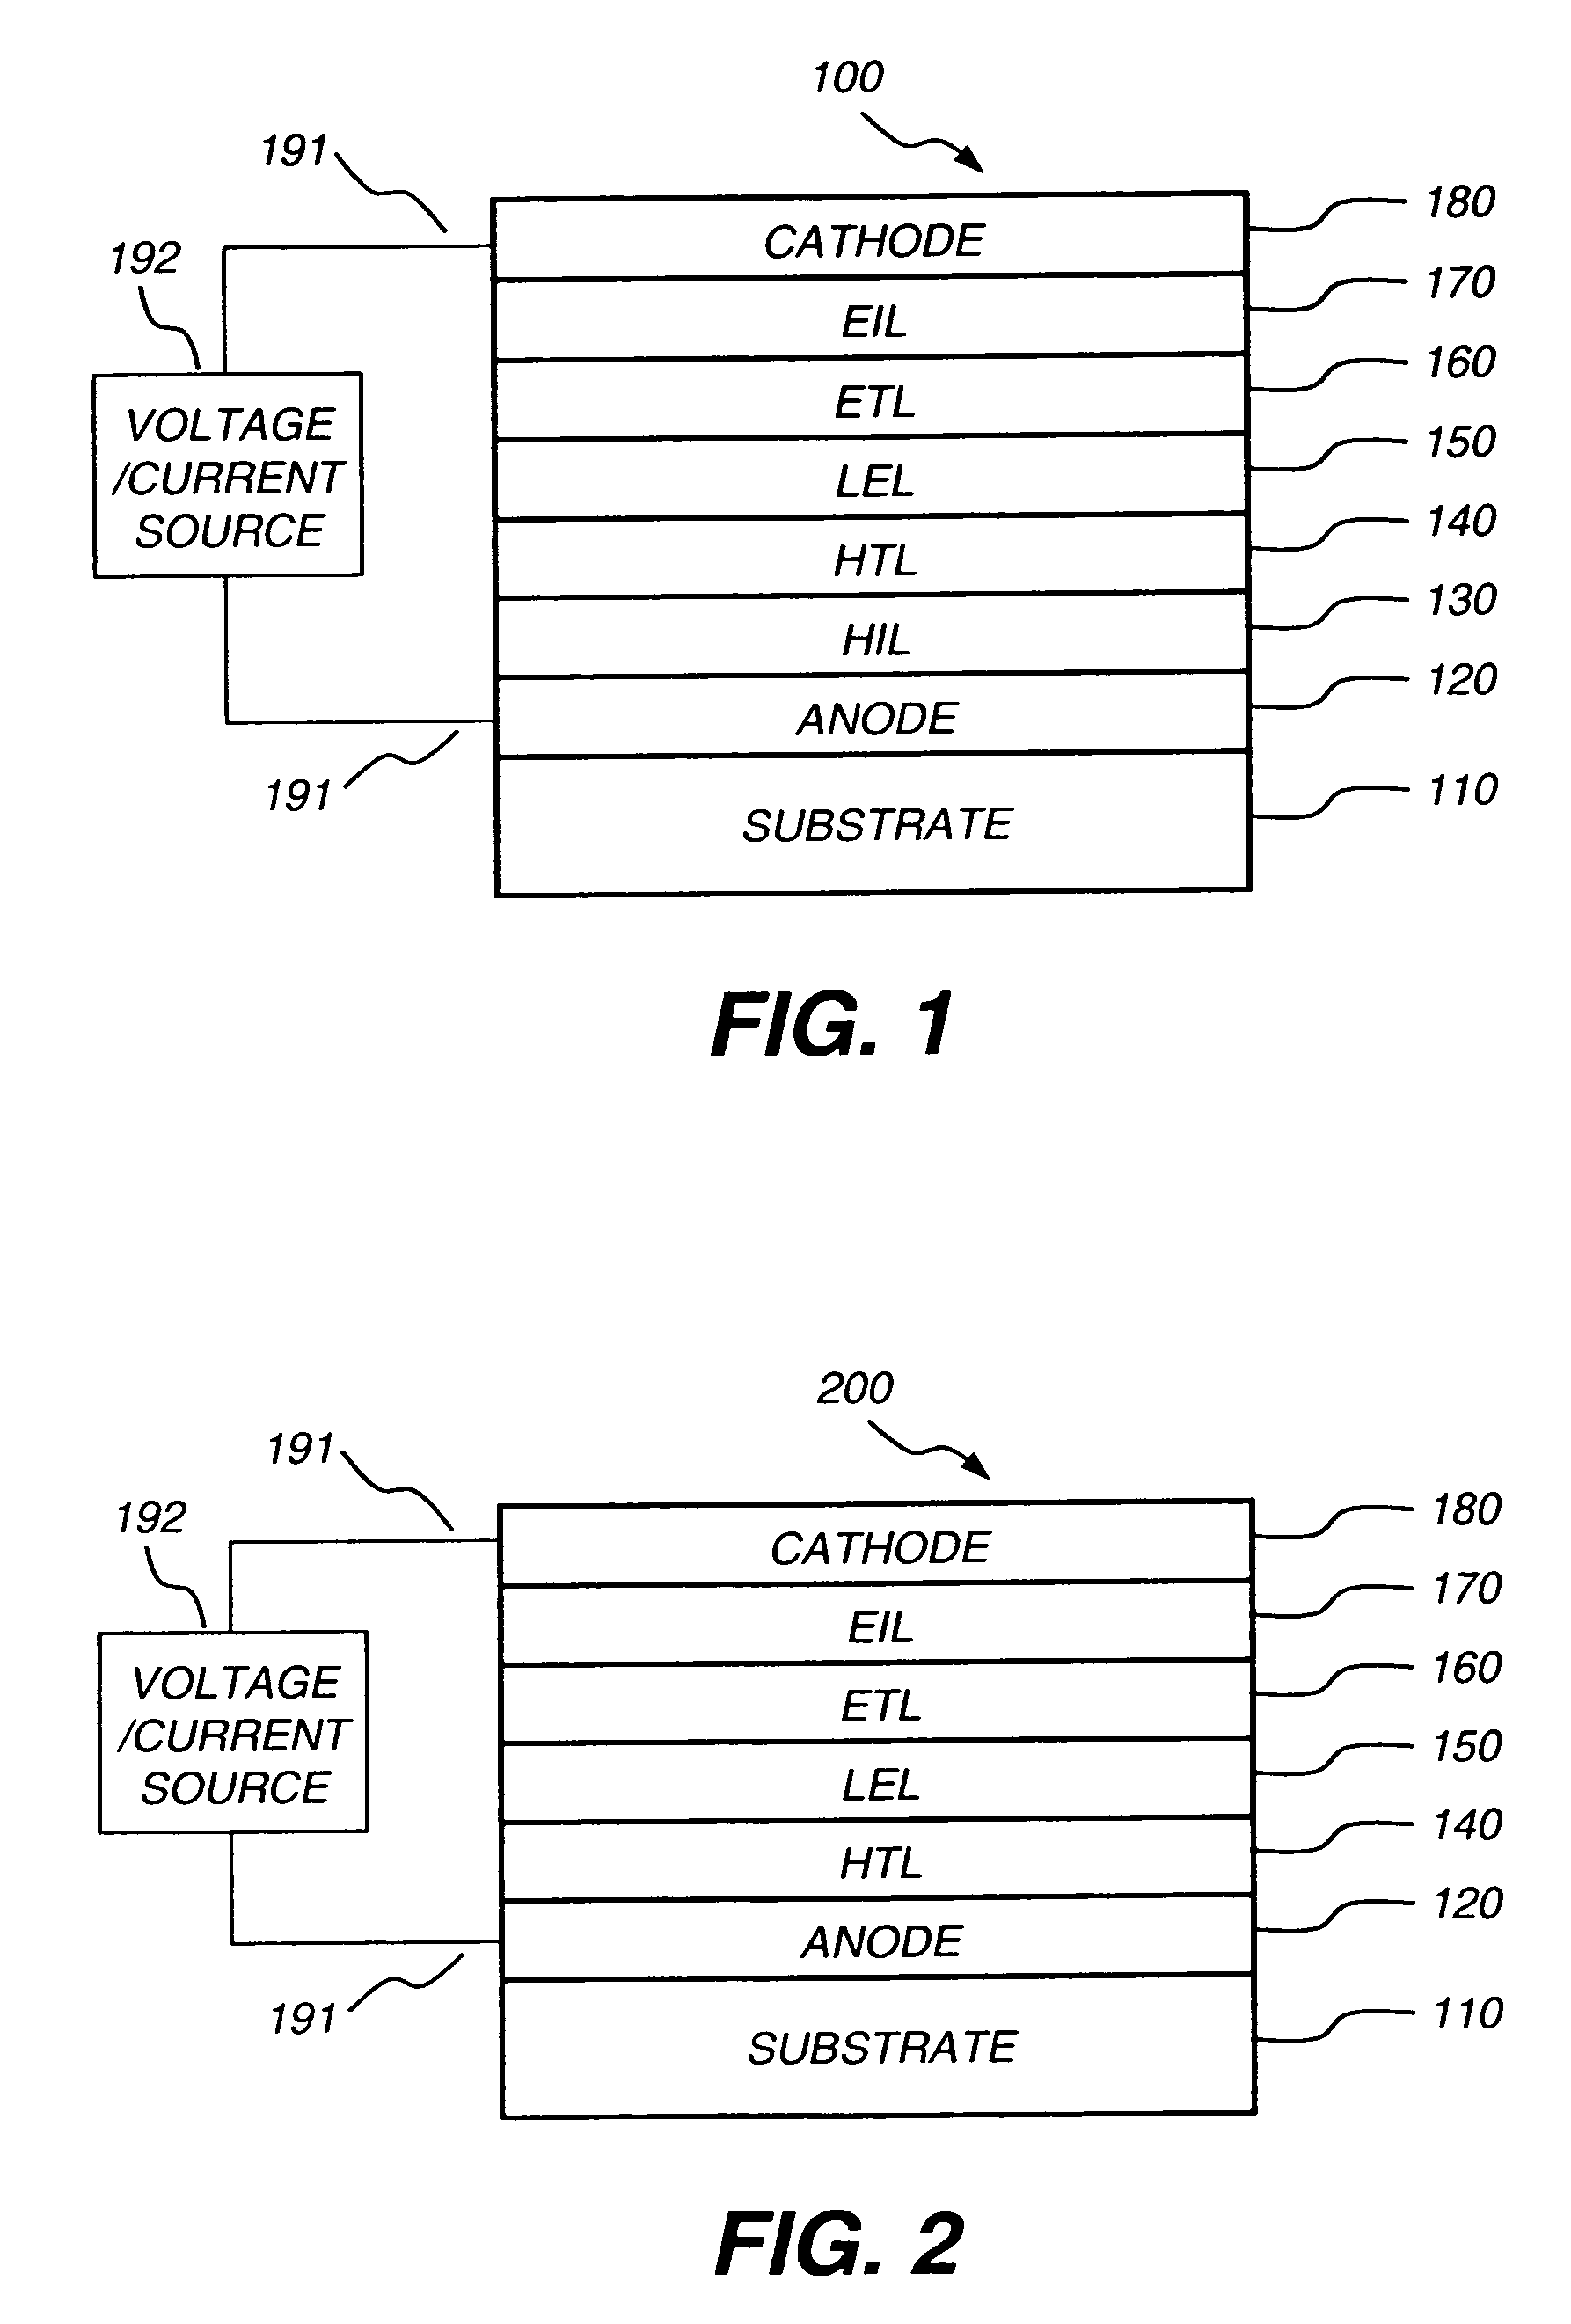 OLED electron-transporting layer